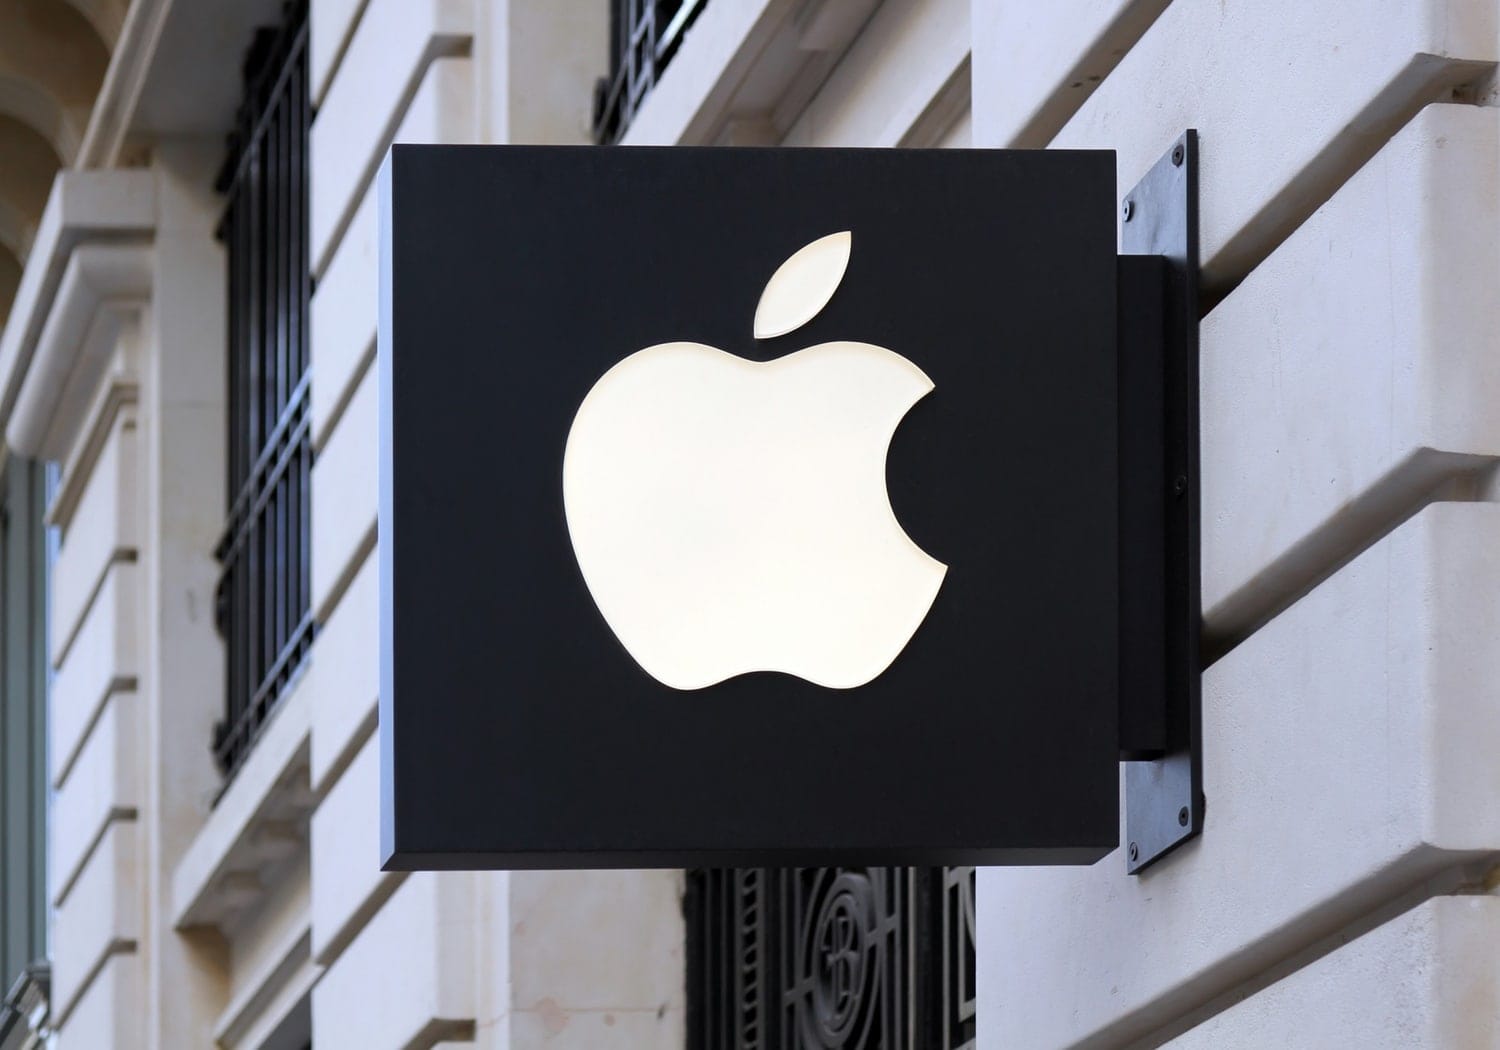 Apple is raising some subscription services costs for the first time.